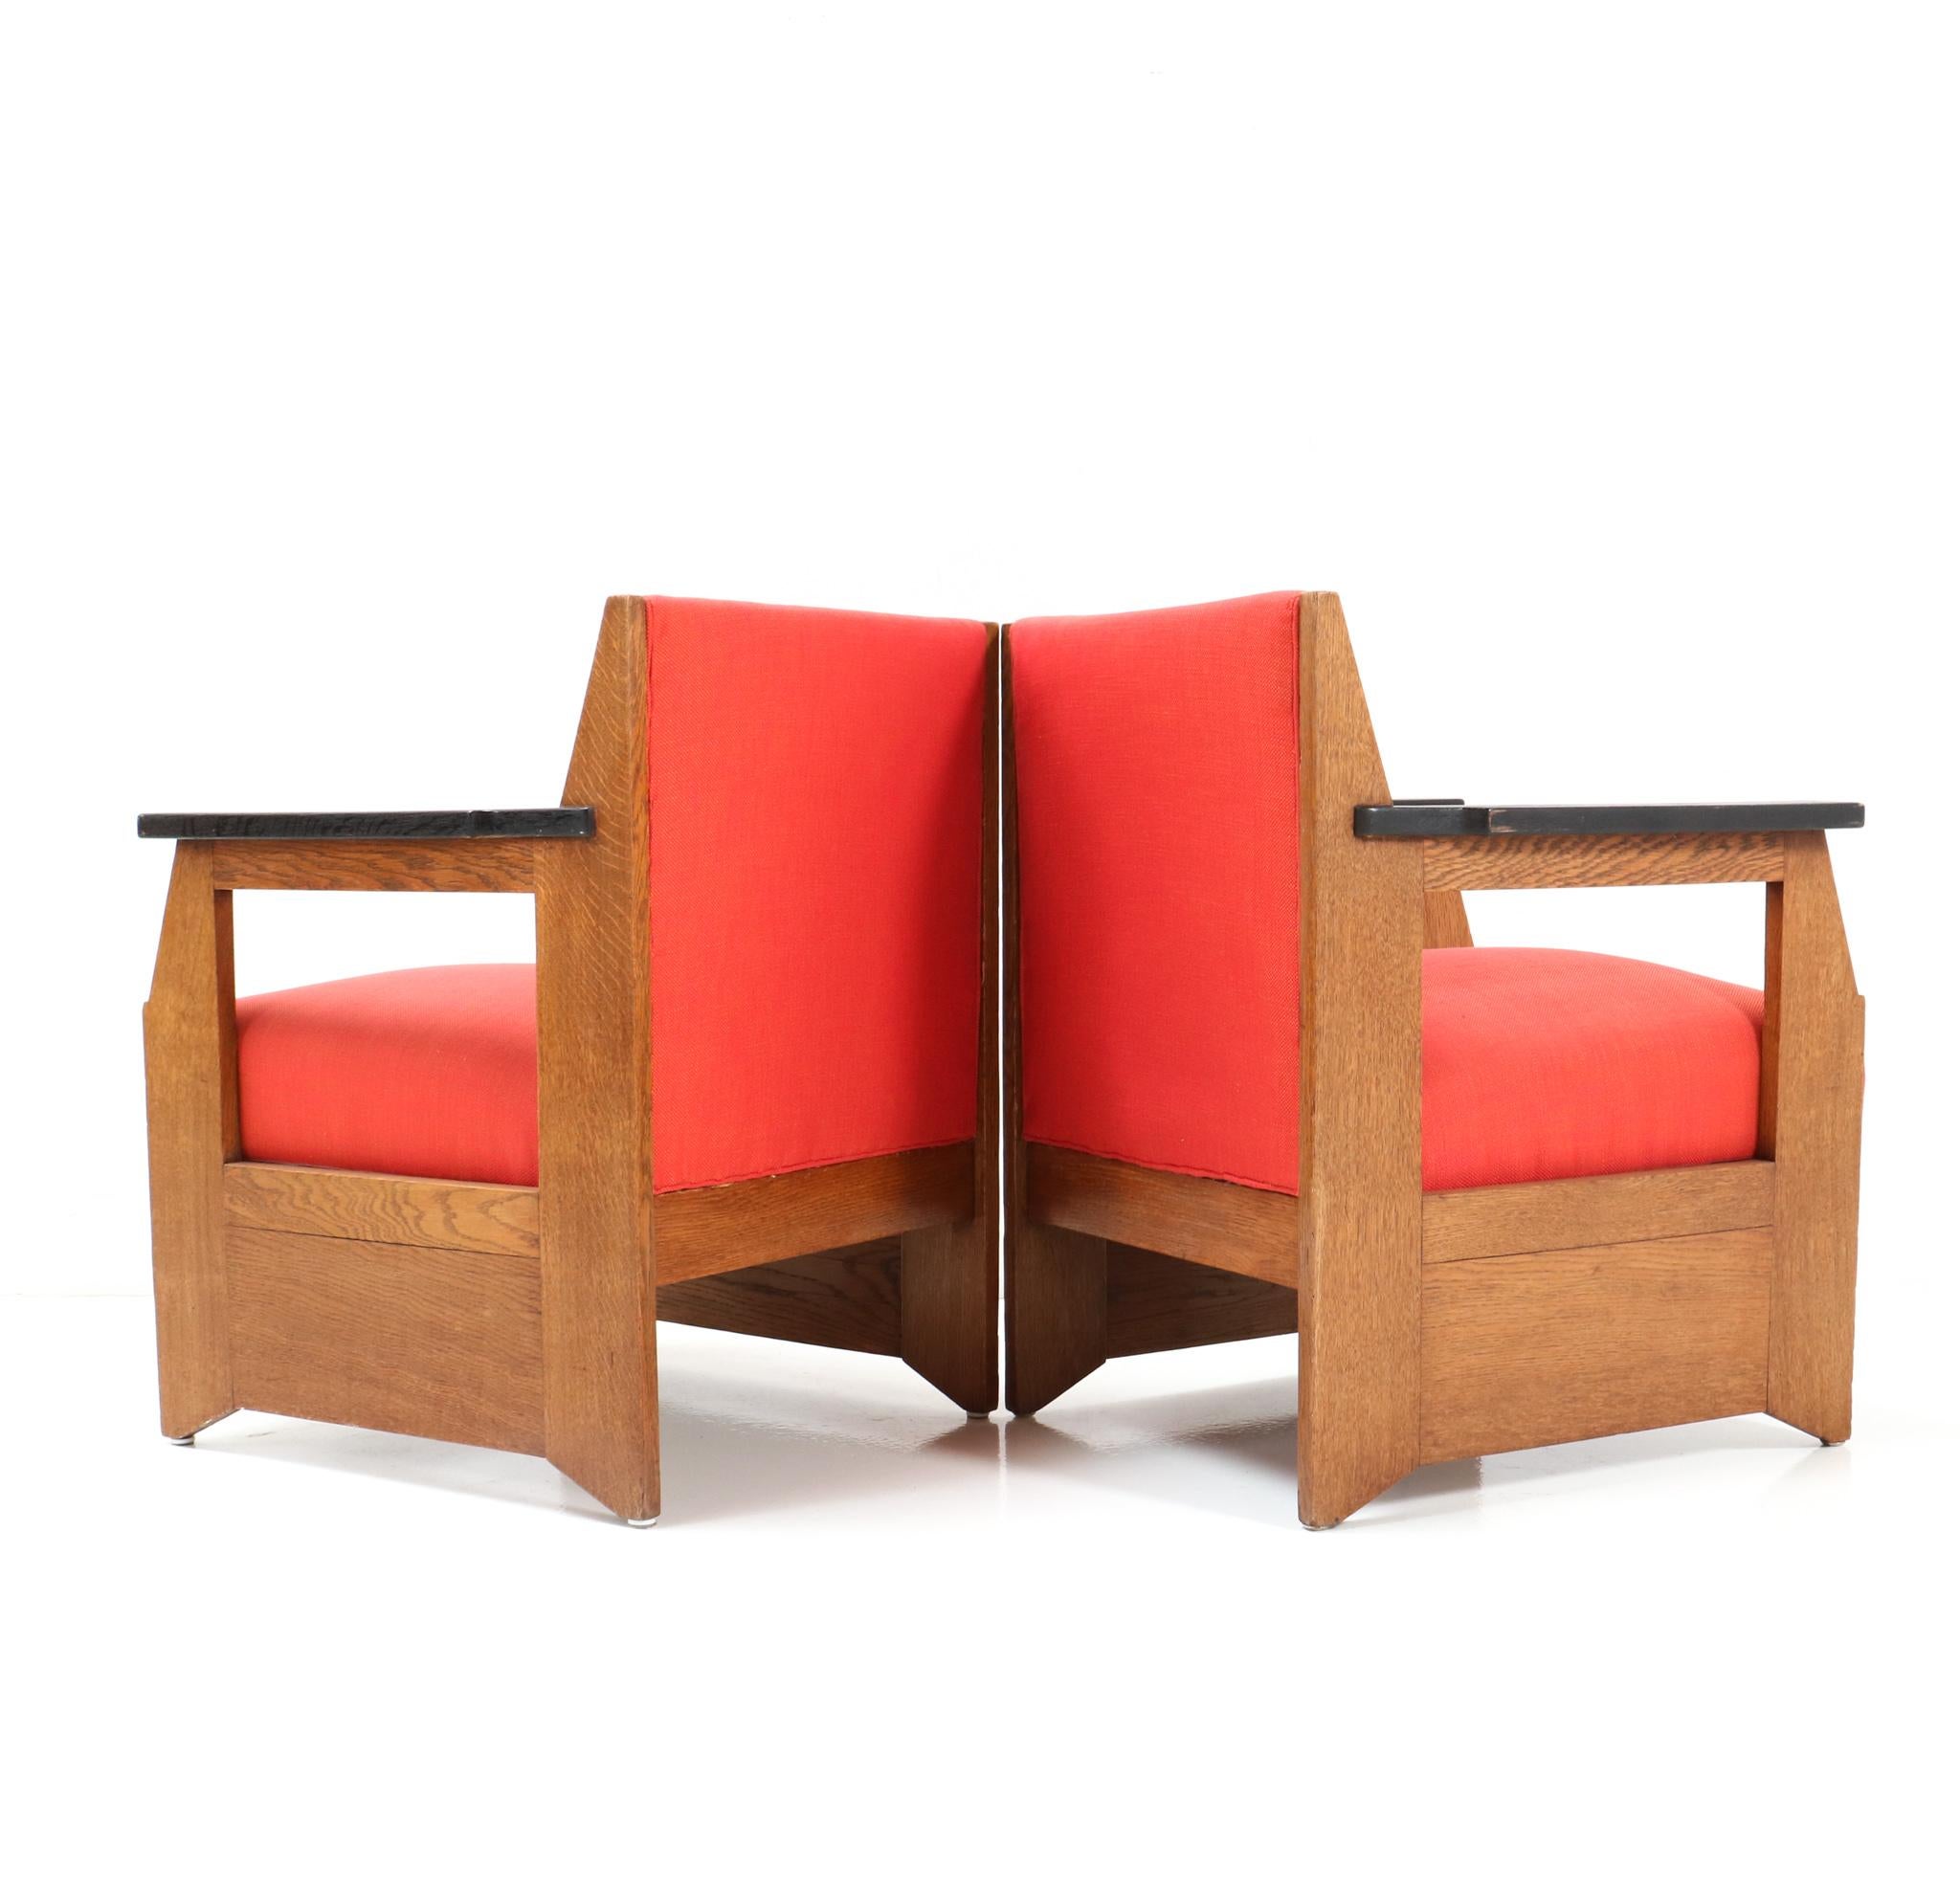 Fabric Pair of Oak Art Deco Modernist Easy Chairs by Hendrik Wouda for Pander, 1924 For Sale